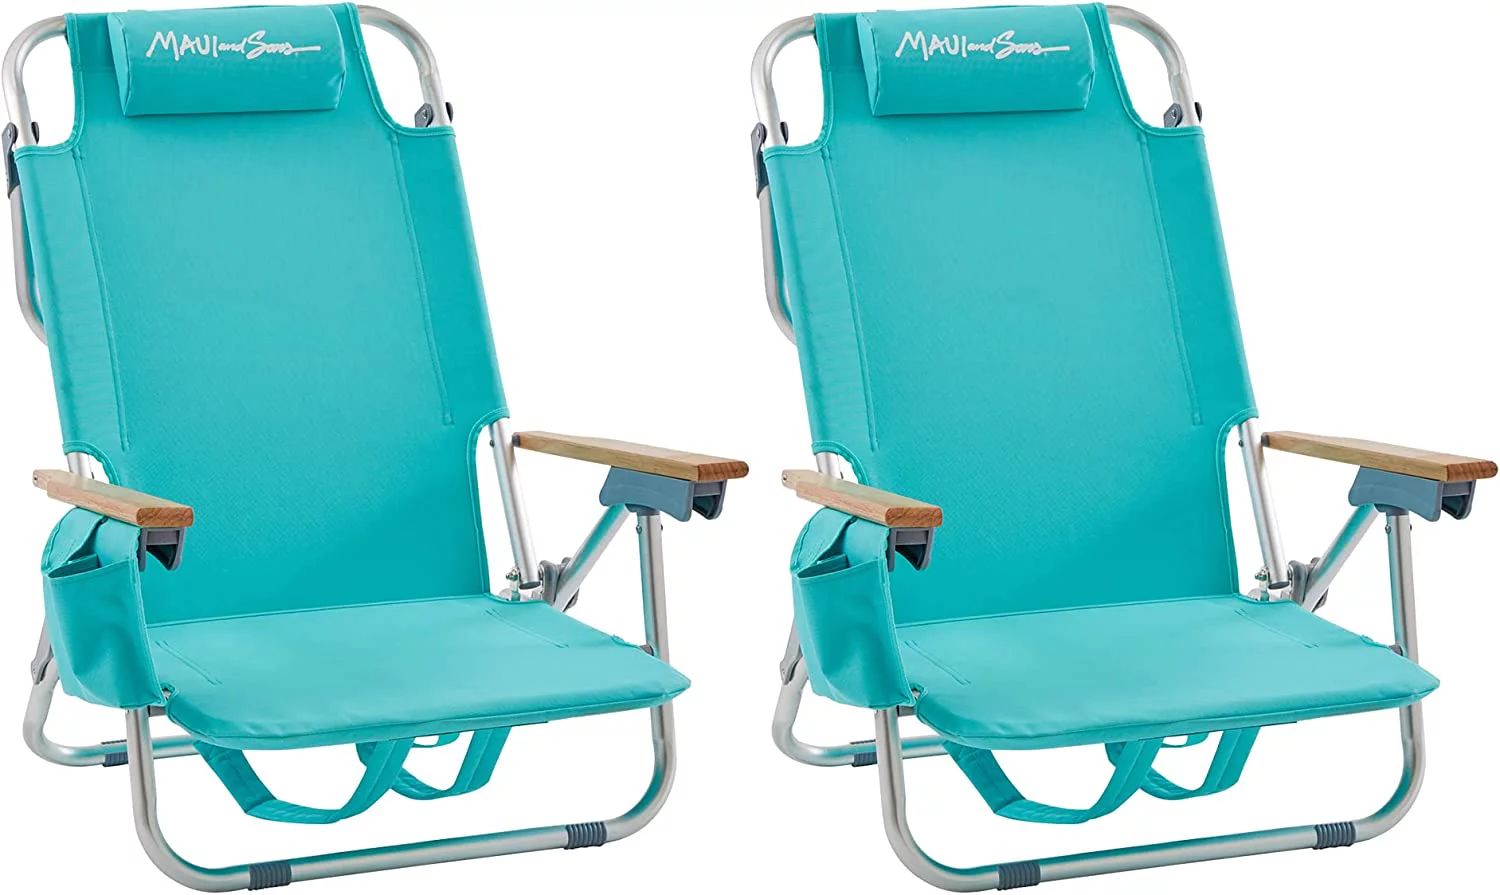 Maui and Sons Deluxe Backpack Beach Chair Set of 2 with 5 Comfort Positions and More, Blue | Walmart (US)